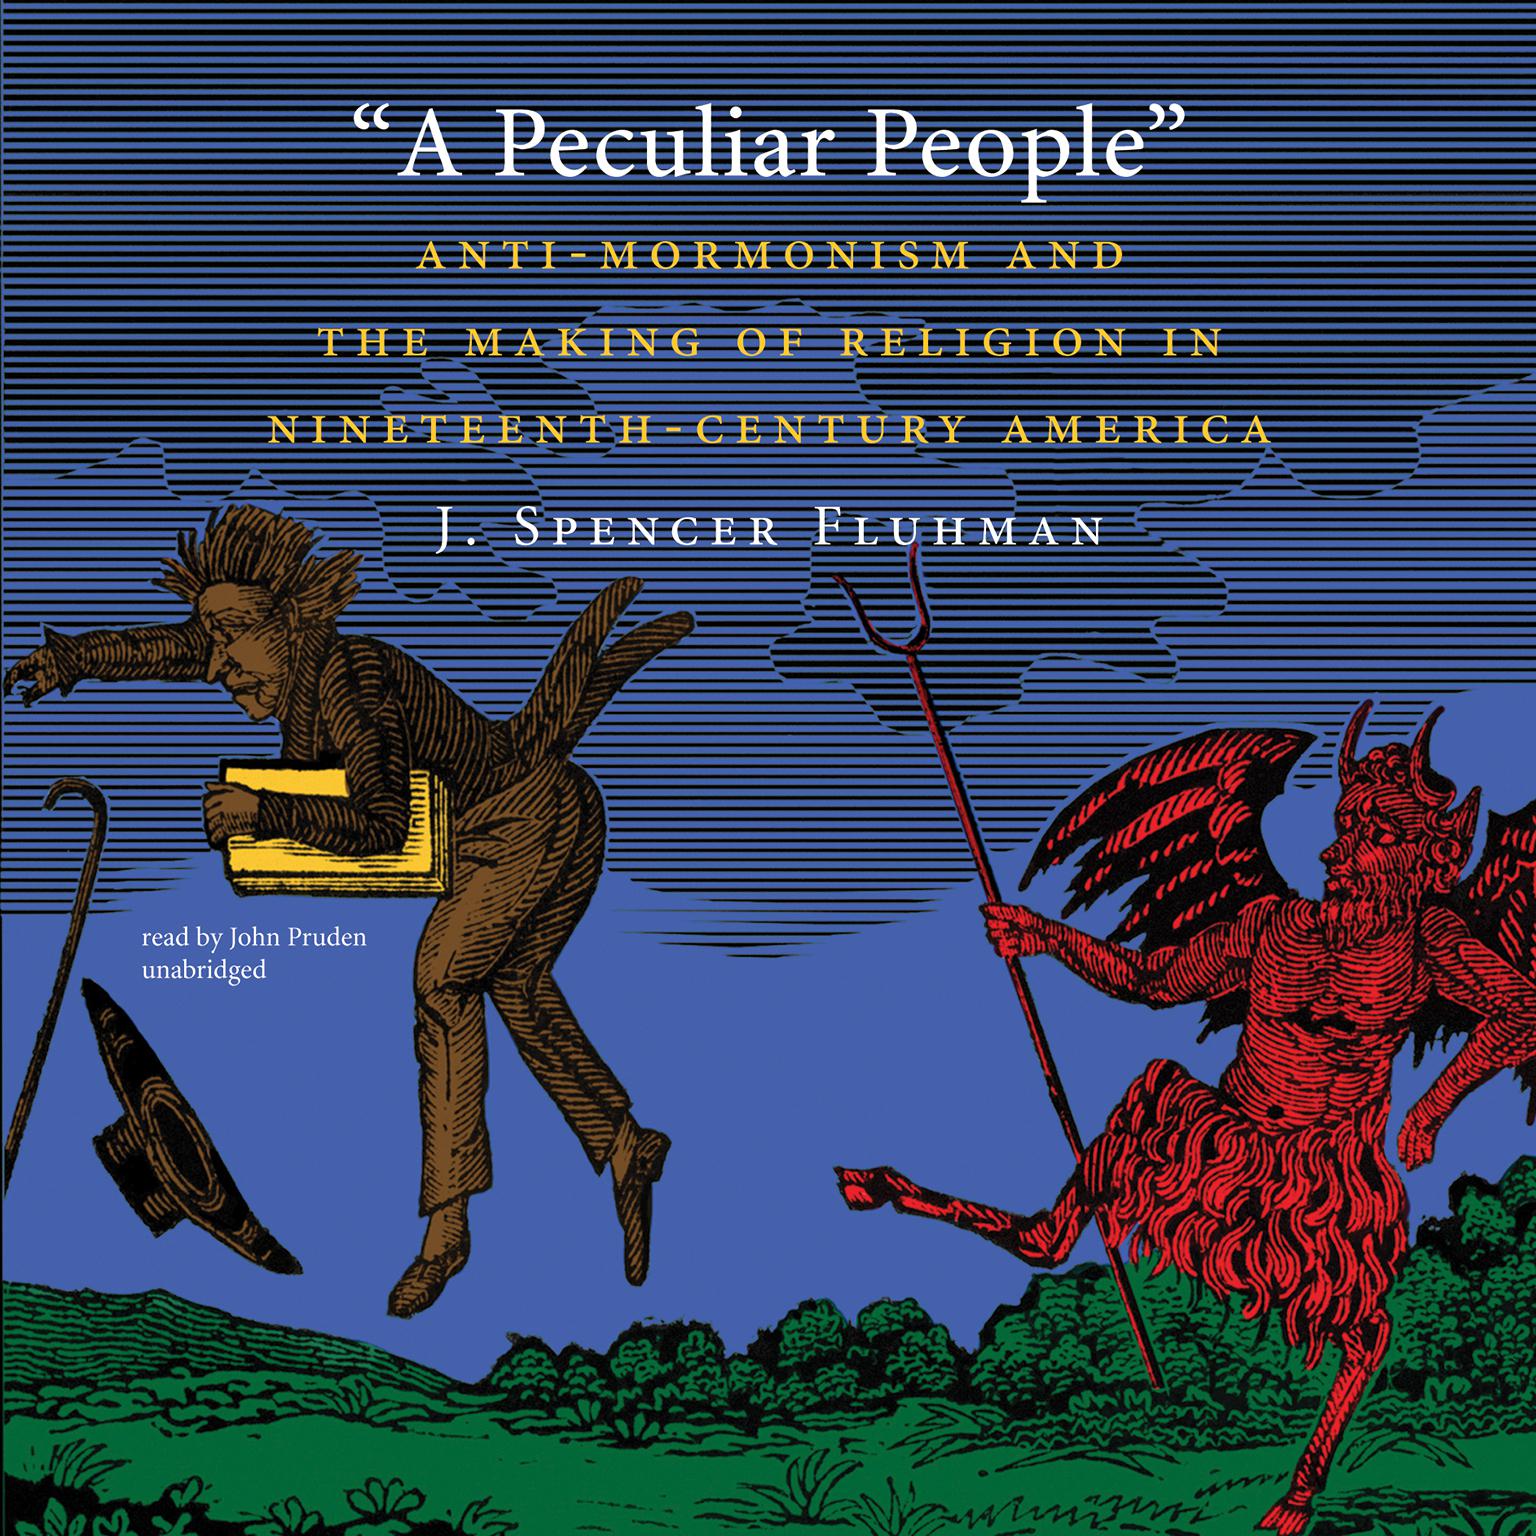 A Peculiar People: Anti-Mormonism and the Making of Religion in Nineteenth-Century America Audiobook, by J. Spencer Fluhman